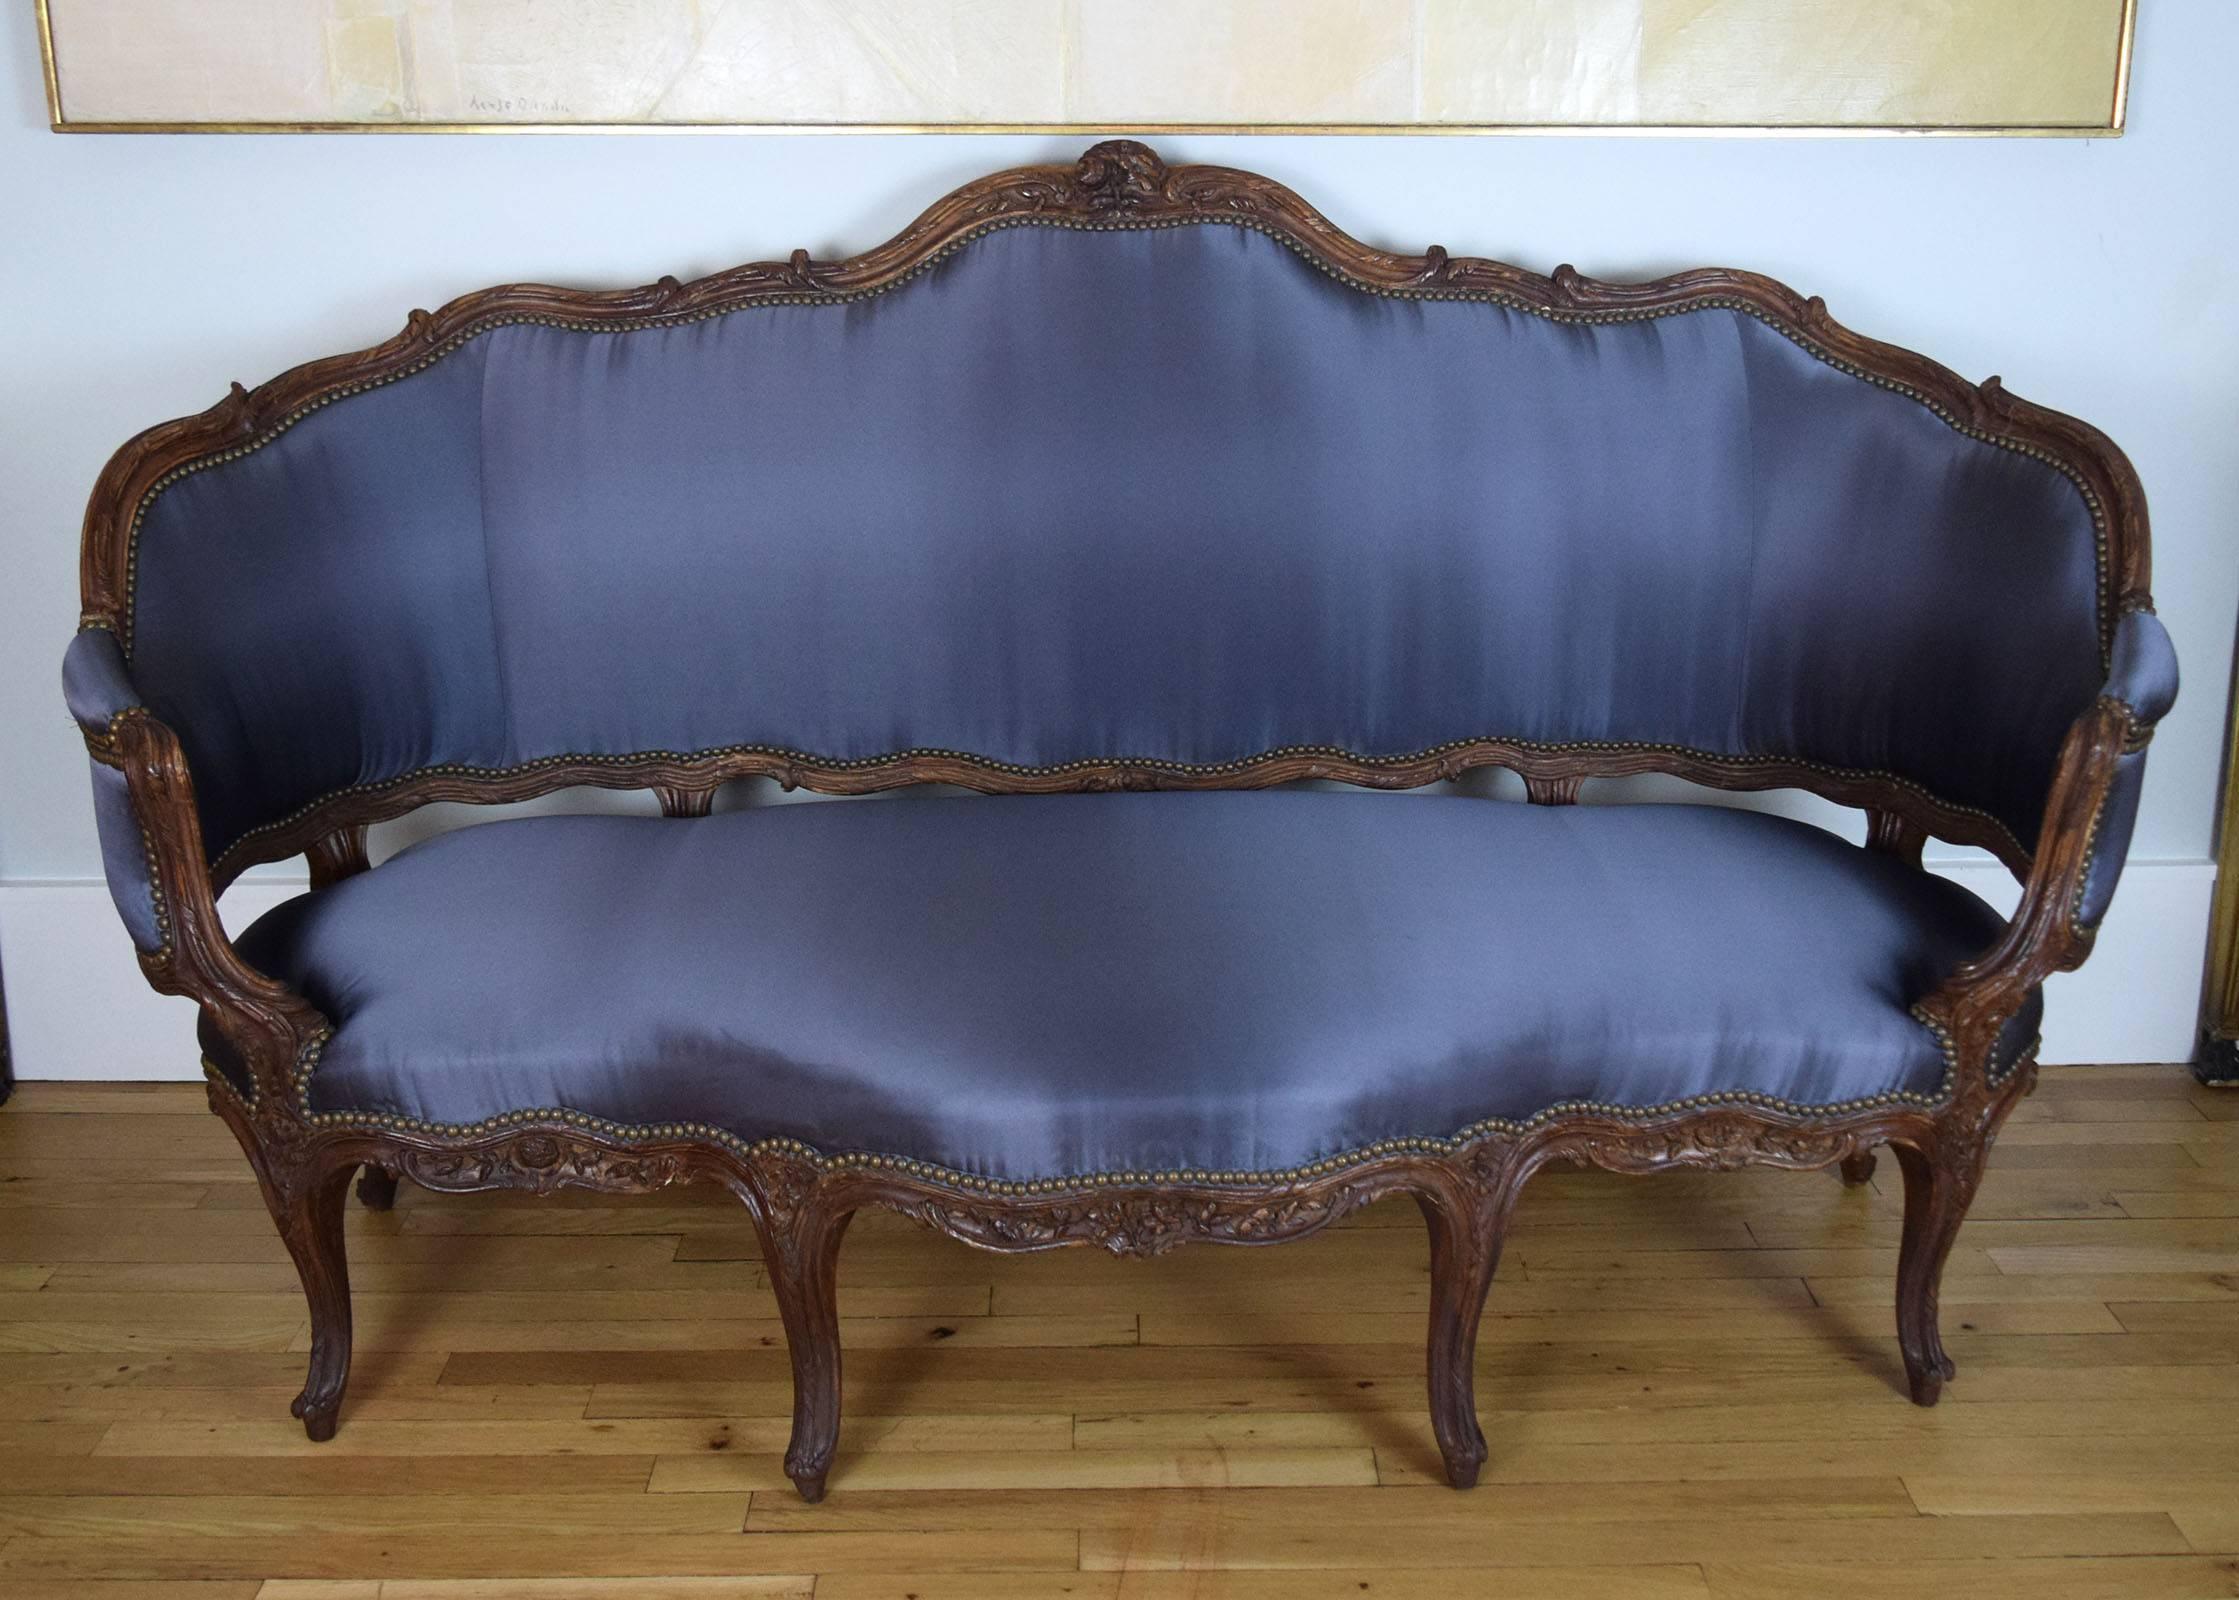 The walnut frame of this large, Louis XV-period sofa is unusual for its highly animated form. It is finely carved with flowers, leaves, bound reeds and scrolling vegetal forms. We have had it reupholstered in slate-blue silk satin.